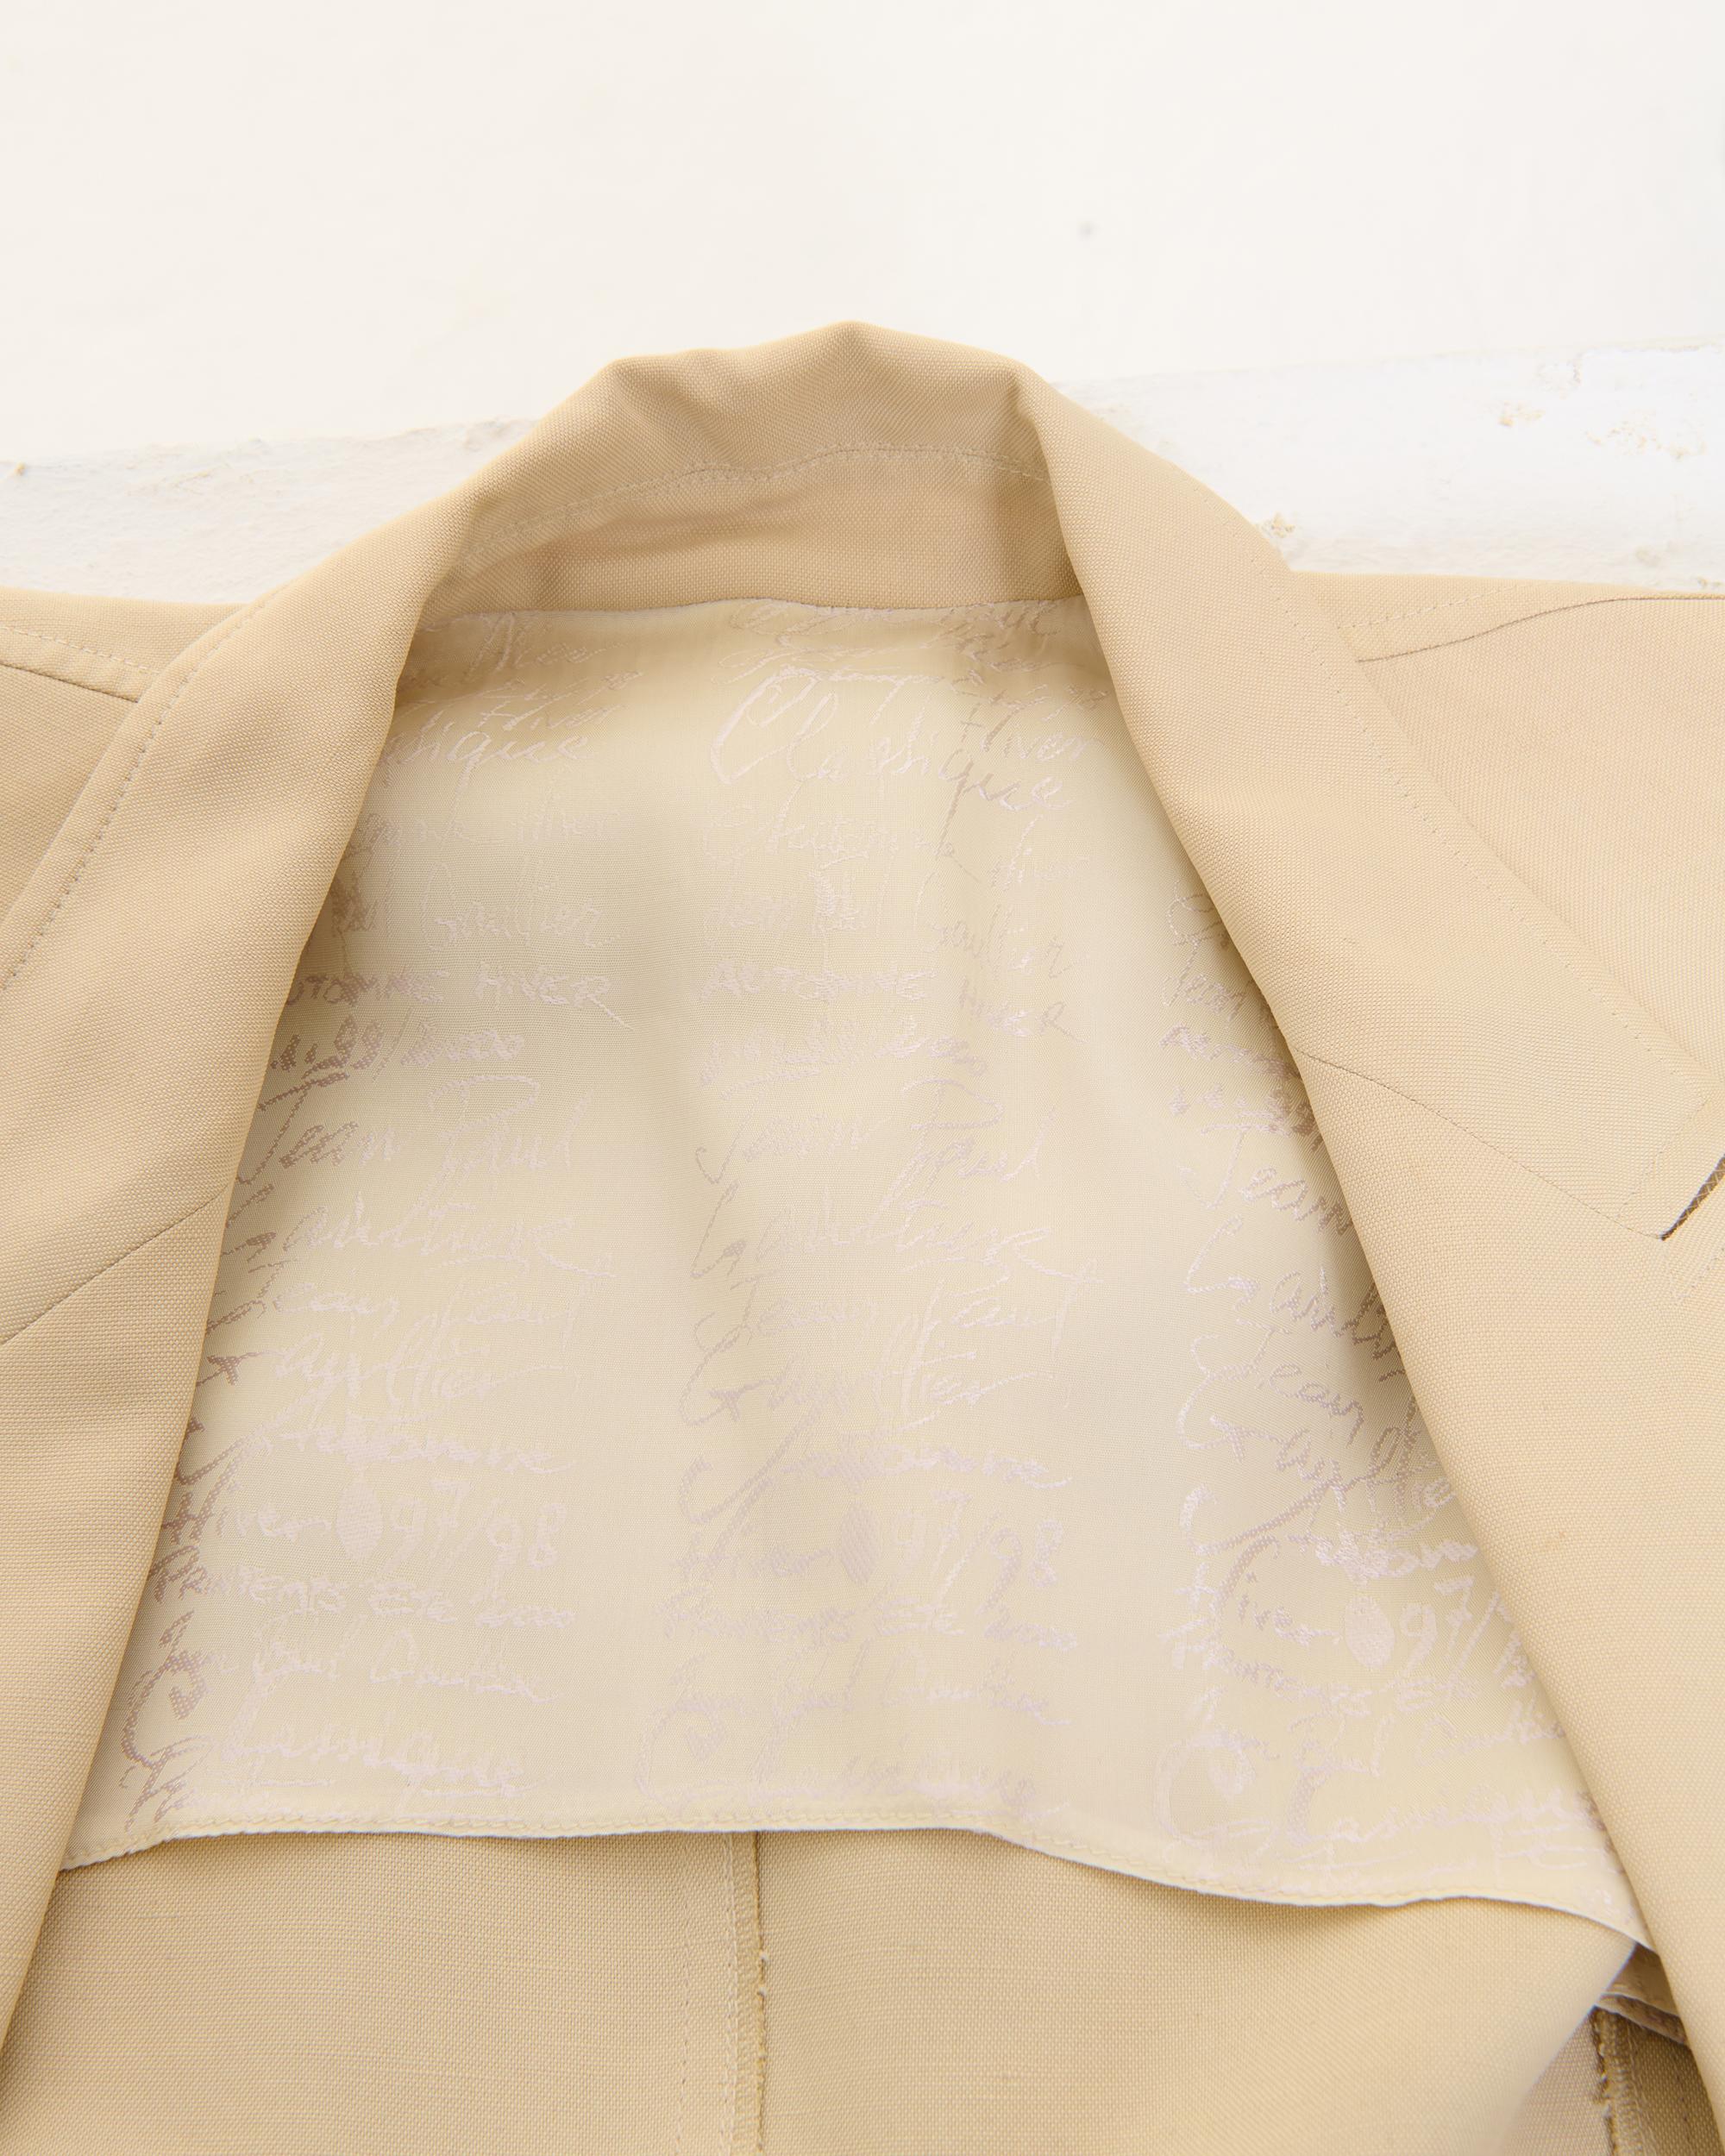 Jean Paul Gaultier F/W 1997 Cream linen double breasted blazer two pieces jacket For Sale 5